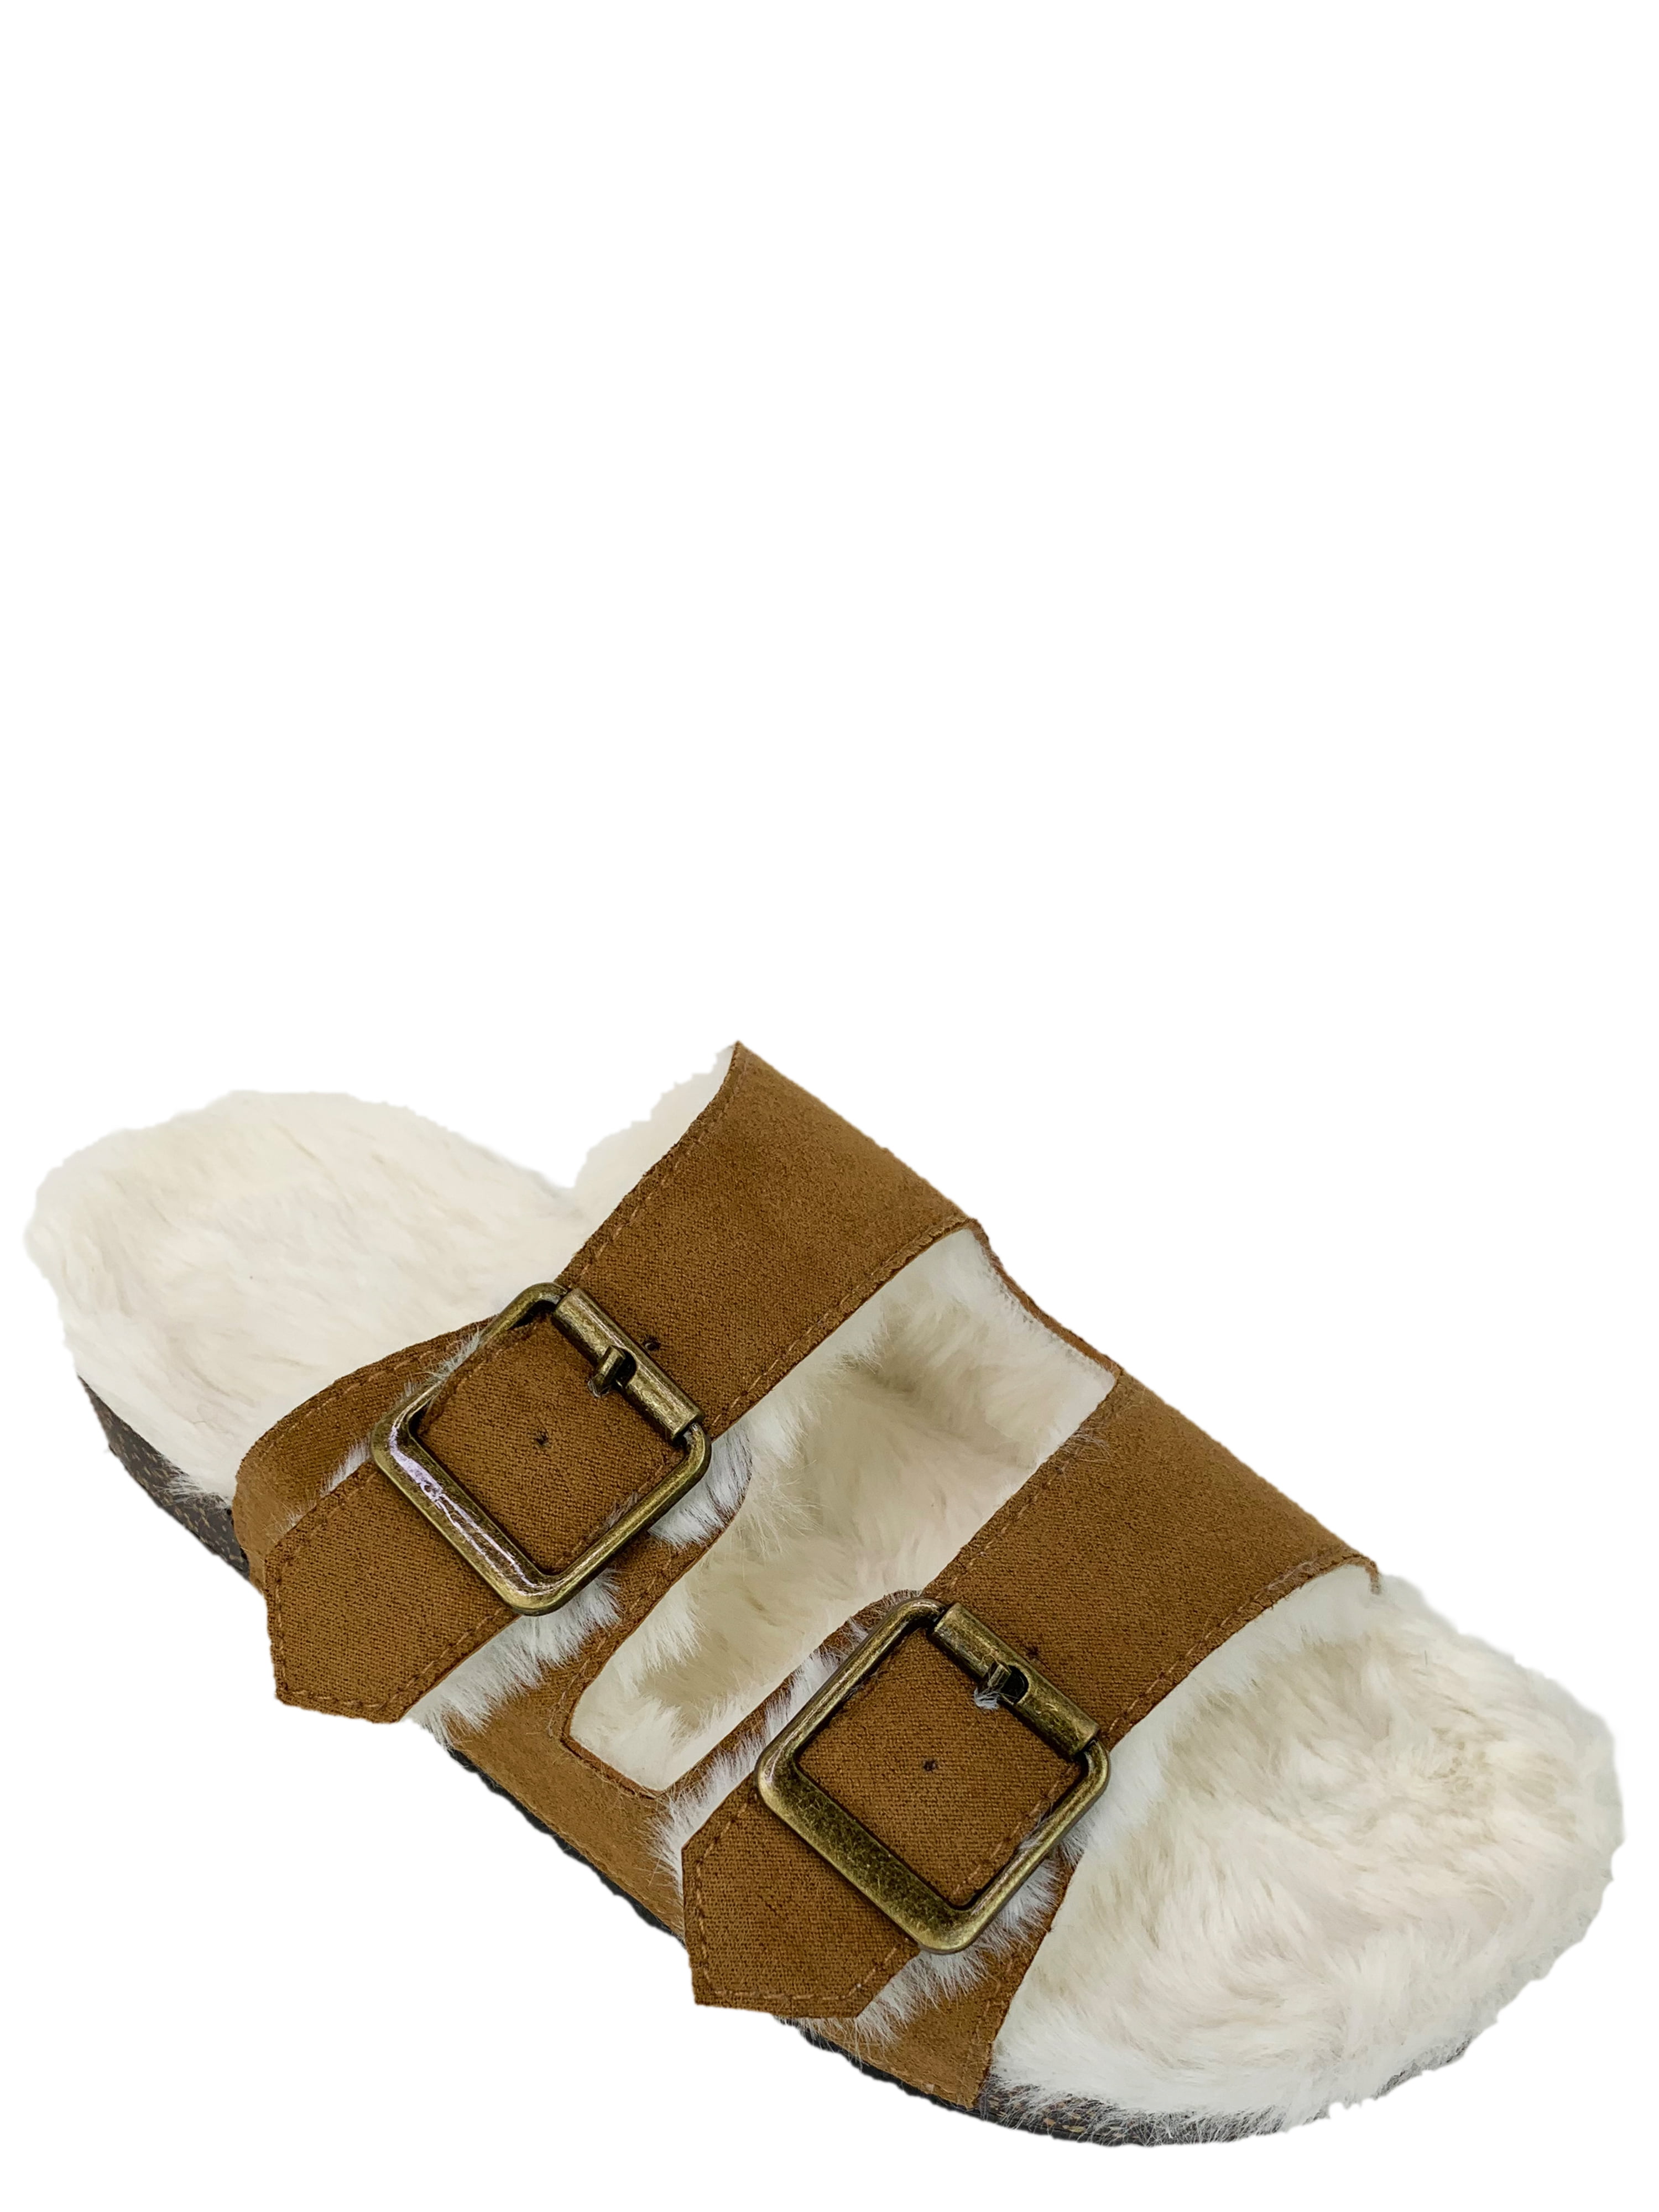 Designer Shearling Slippers Womens Paris Furry Square Sandals With Recycled  Faux Fur And Open Back Luxurious Winter Wool Slides In Sizes 35 40 With Box  From Ogmine, $53.04